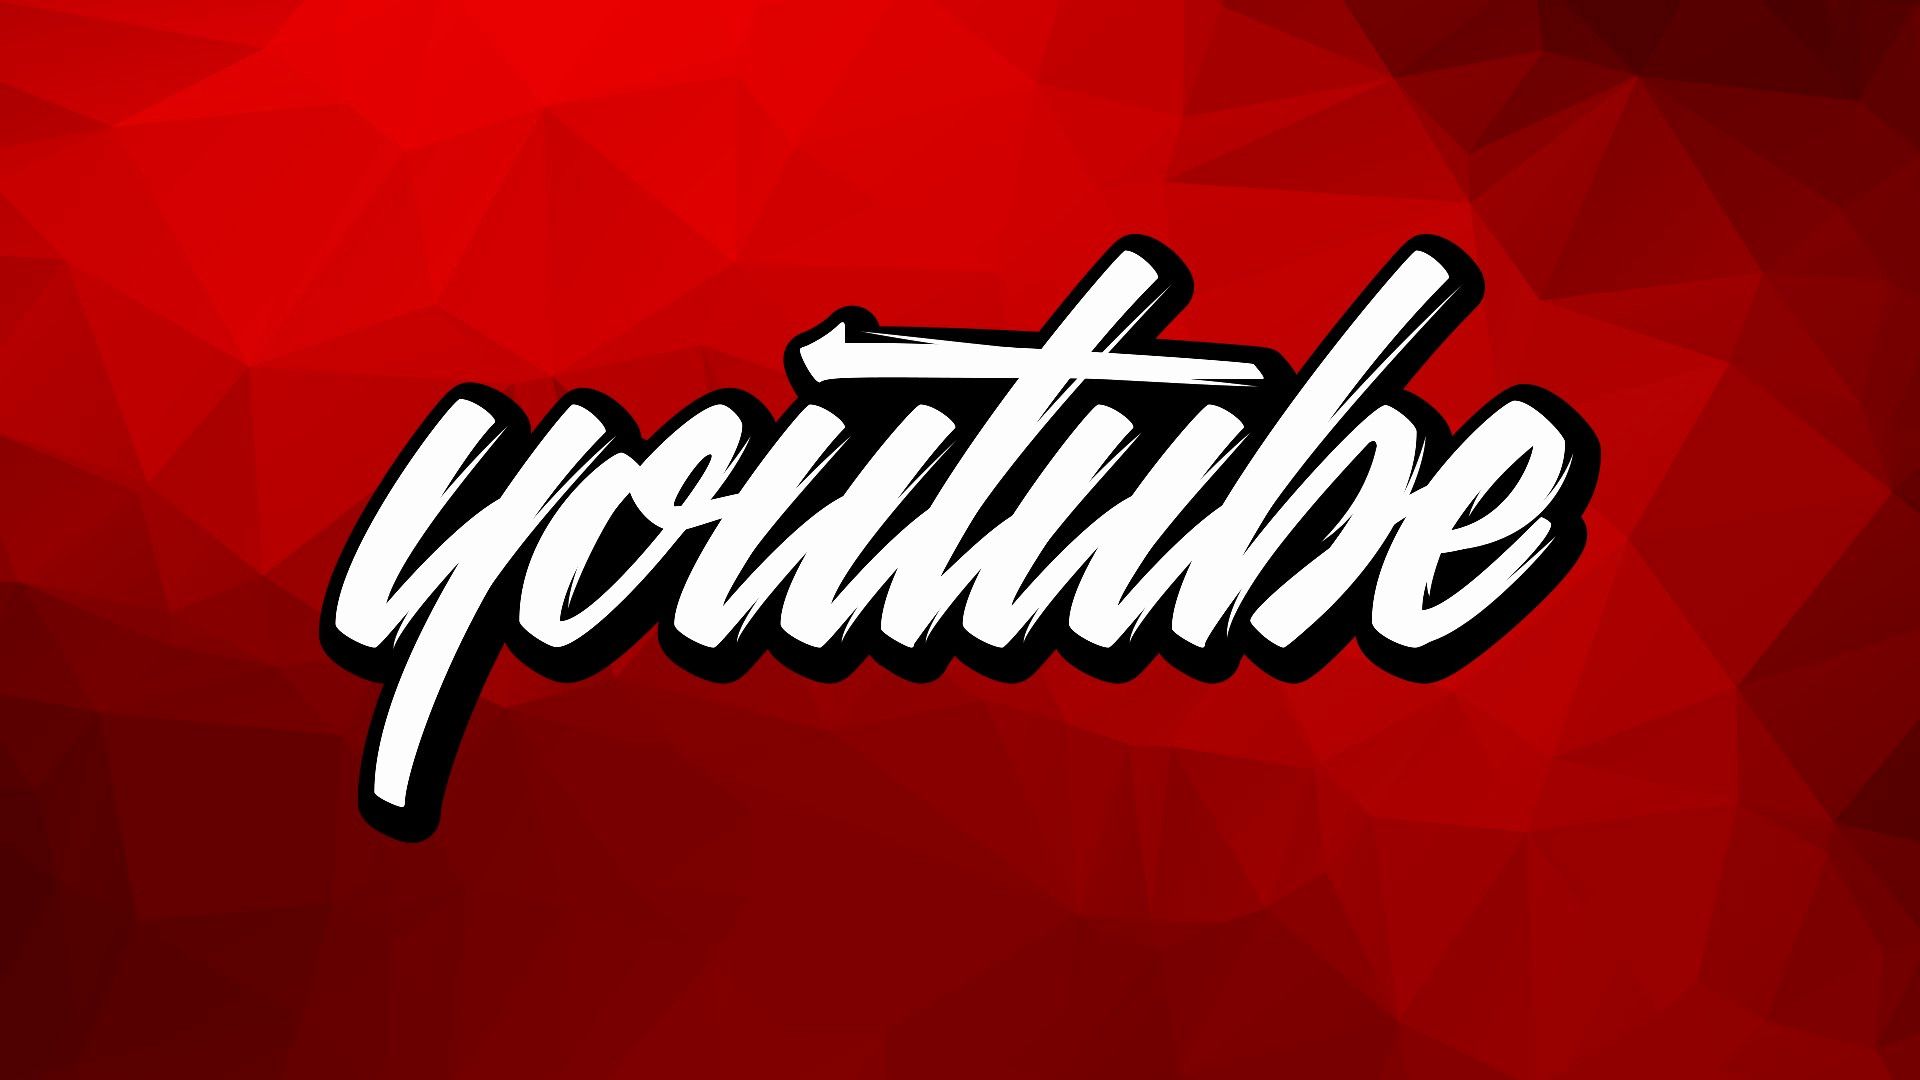 Cool Youtube Backgrounds HD Free download 